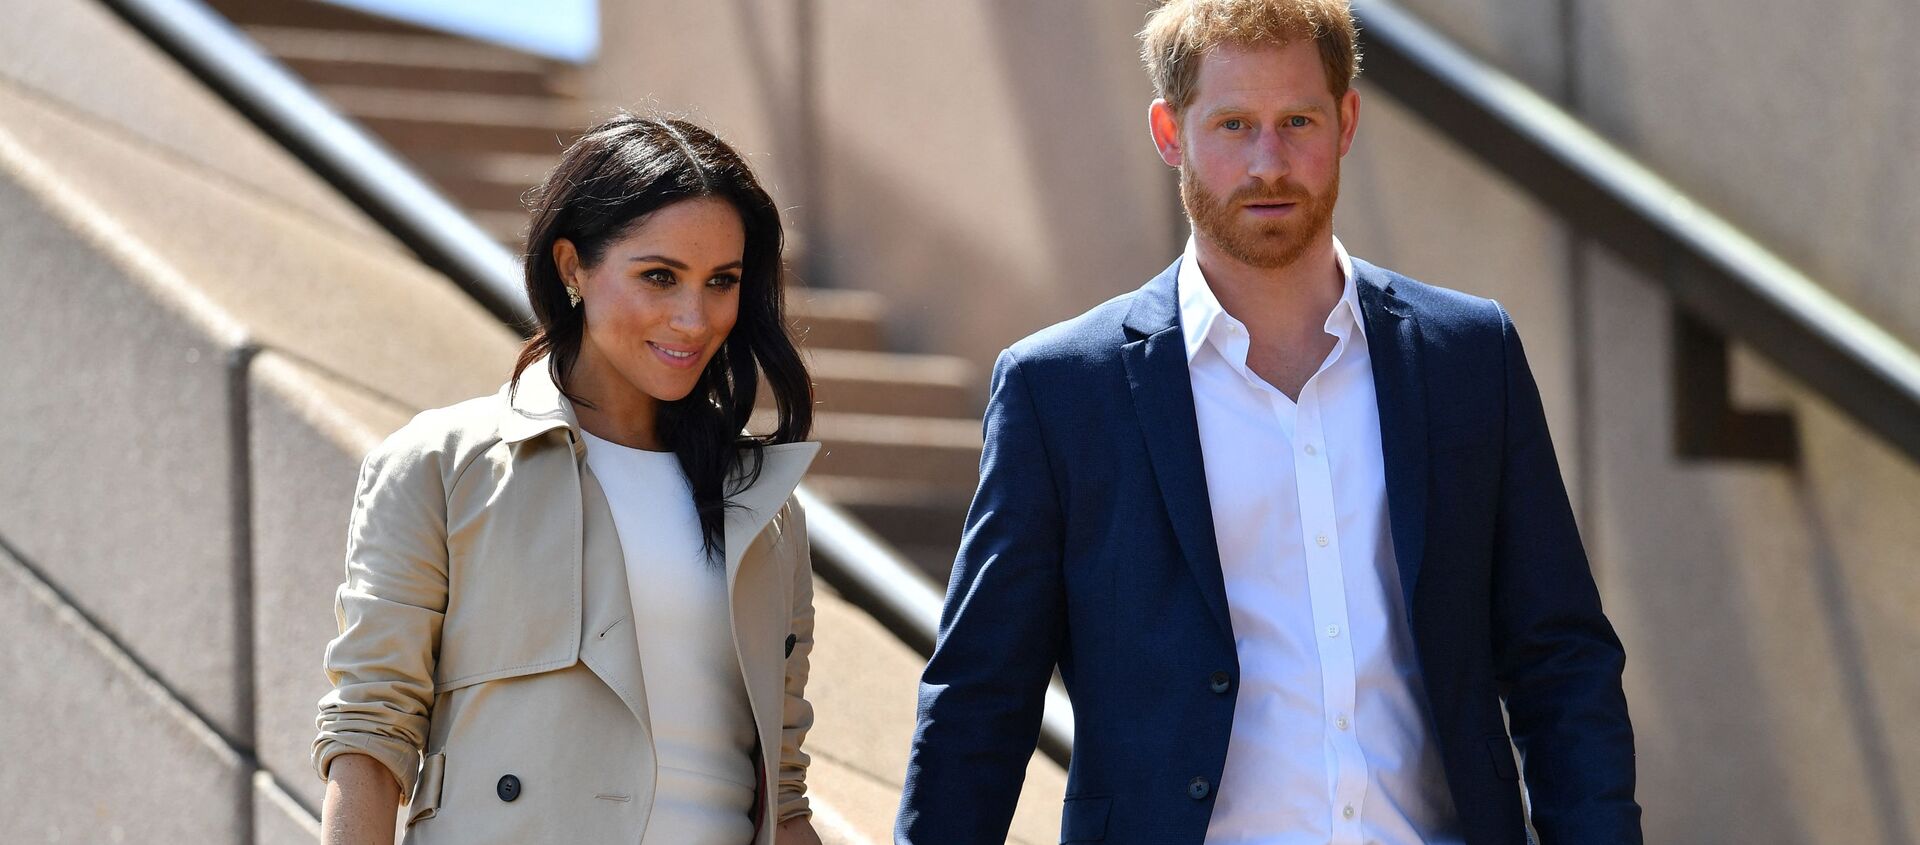 (FILES) In this file photo taken on October 16, 2018 Britain's Prince Harry and his wife Meghan walk down the stairs of Sydney’s iconic Opera House to meet people in Sydney - Sputnik International, 1920, 15.03.2021